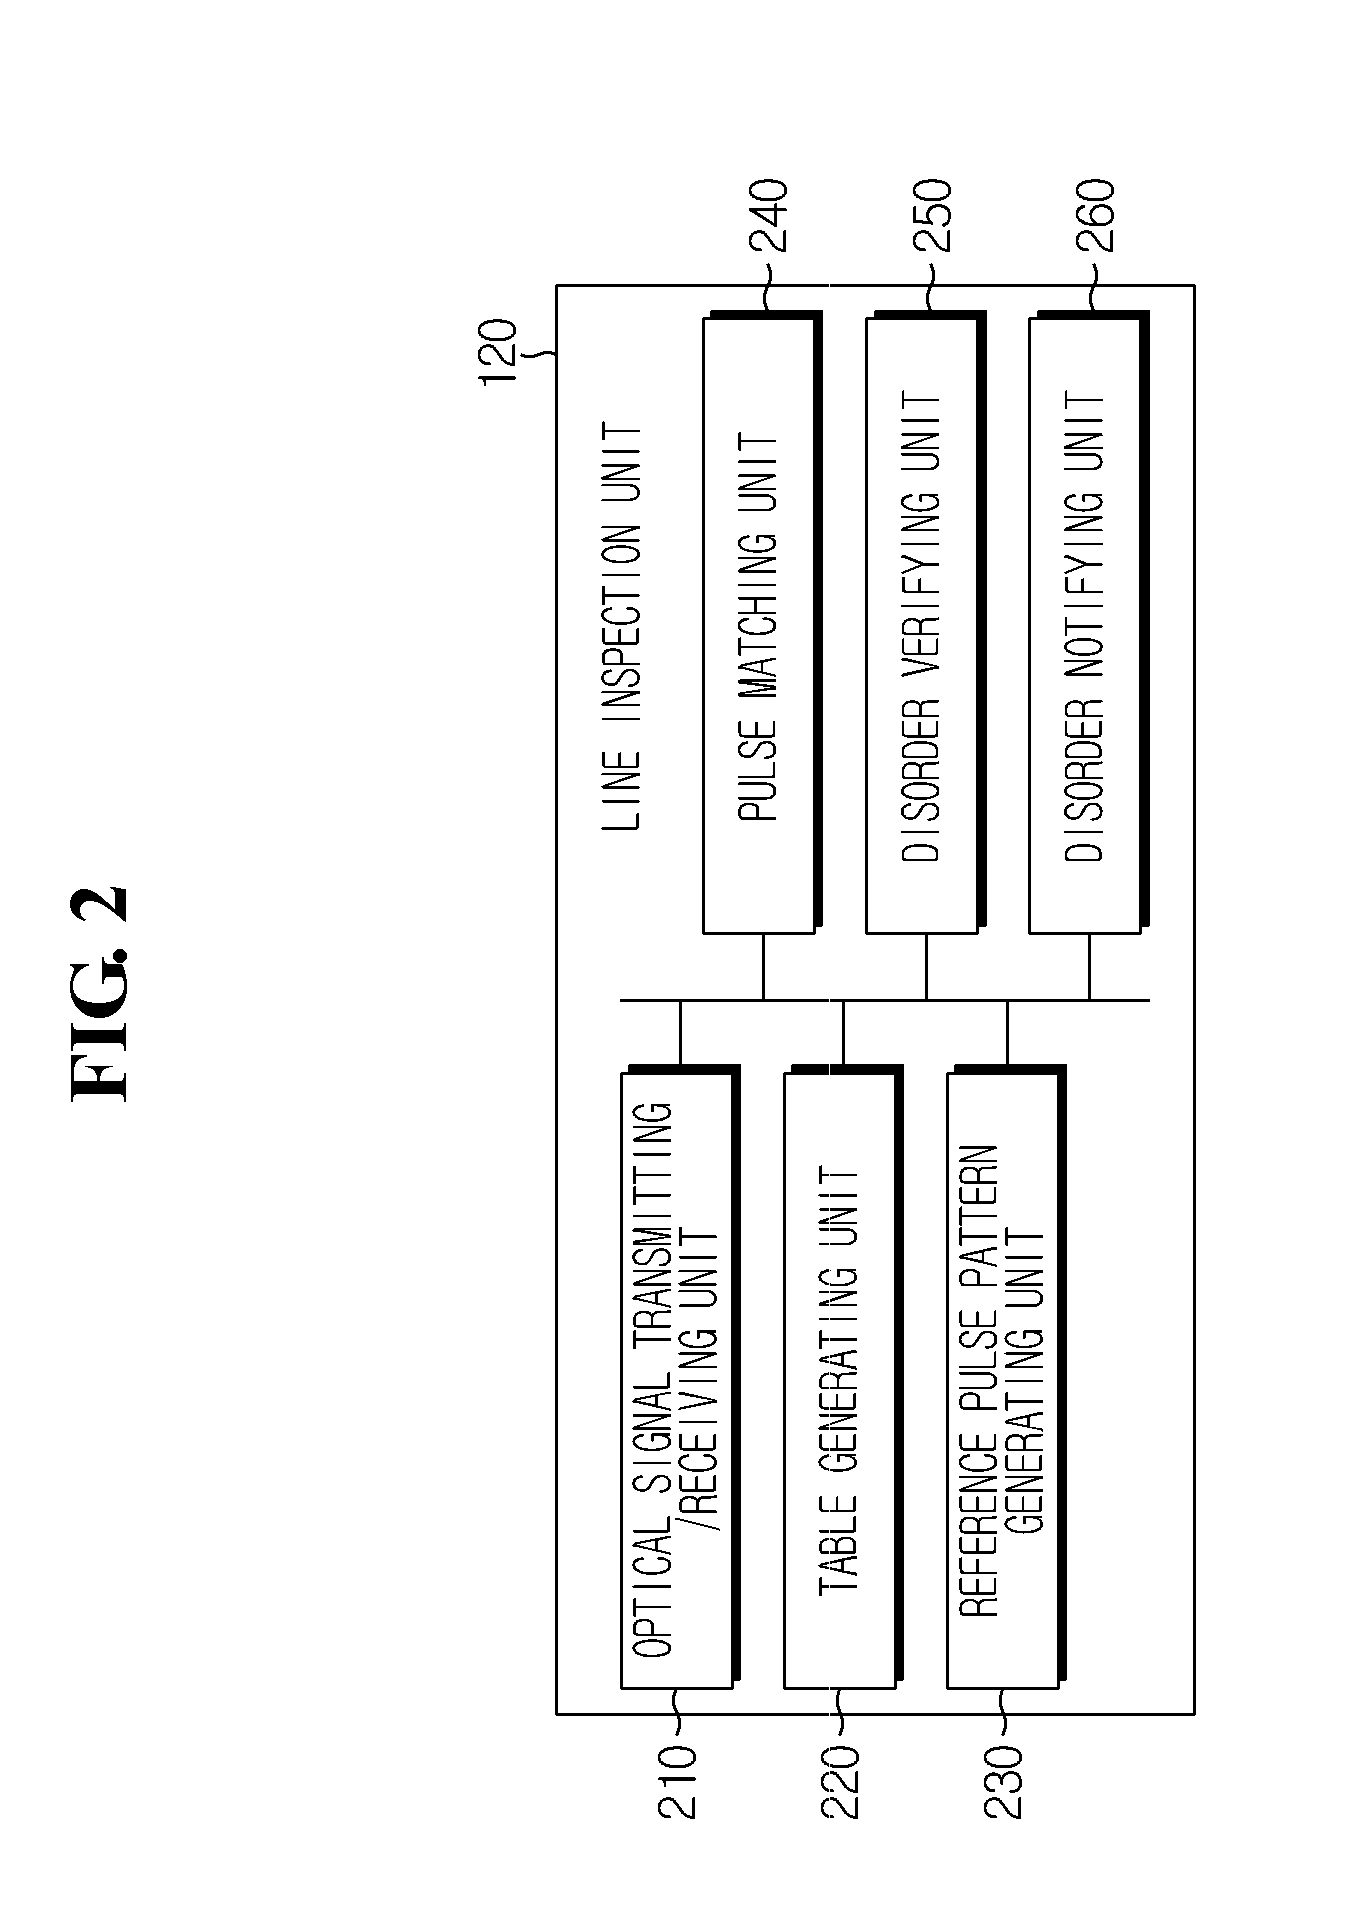 Optical line monitoring system and method